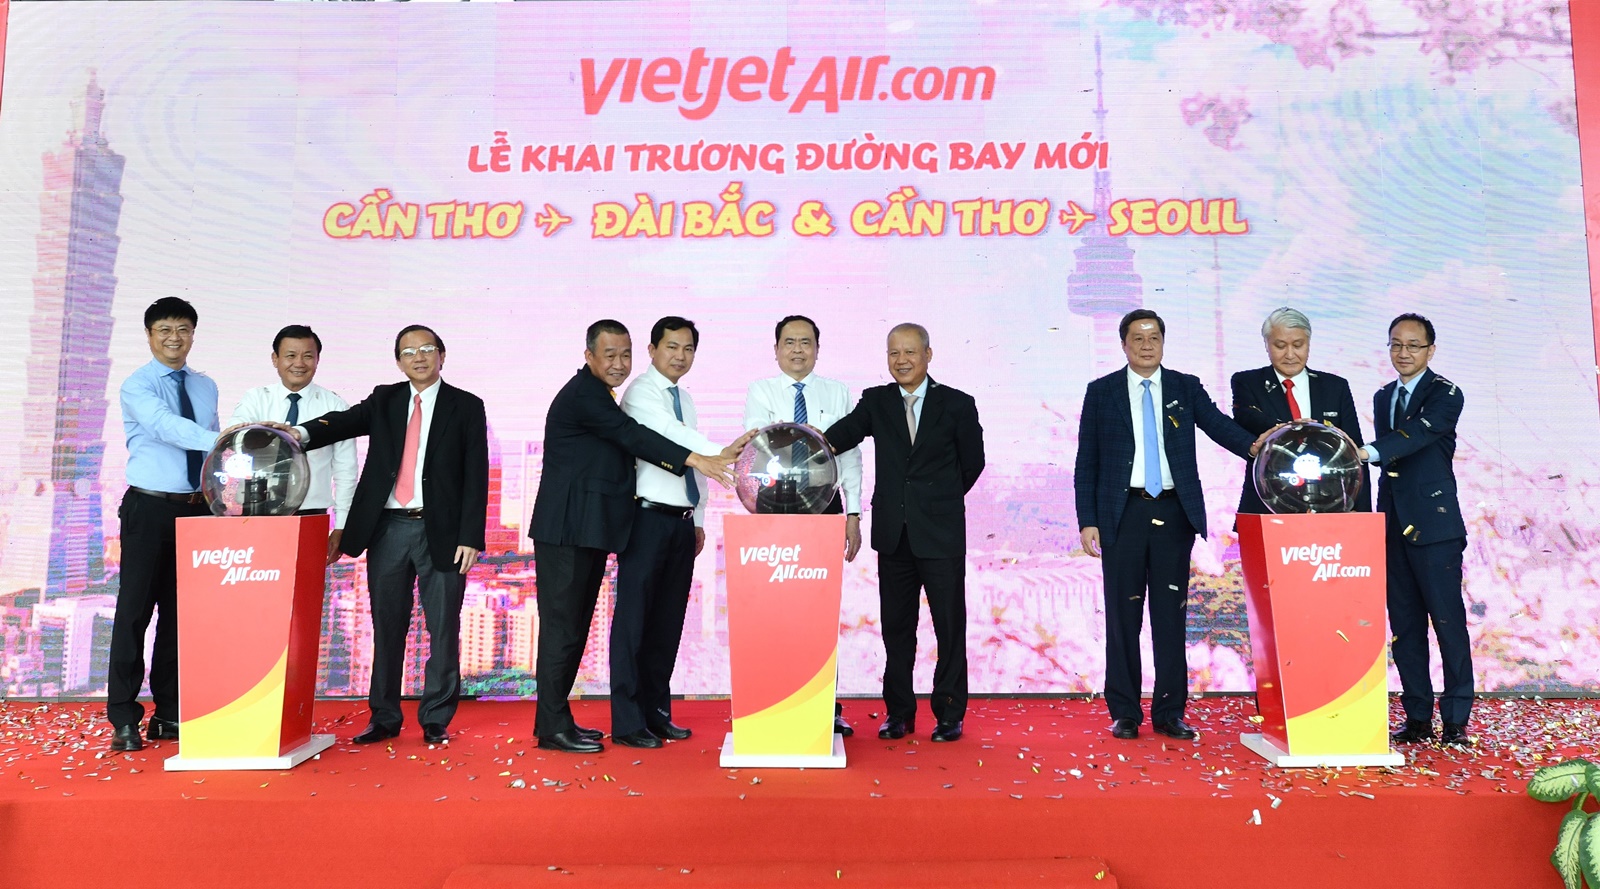 Vietjet operates flights connecting Can Tho with Seoul, Taipei